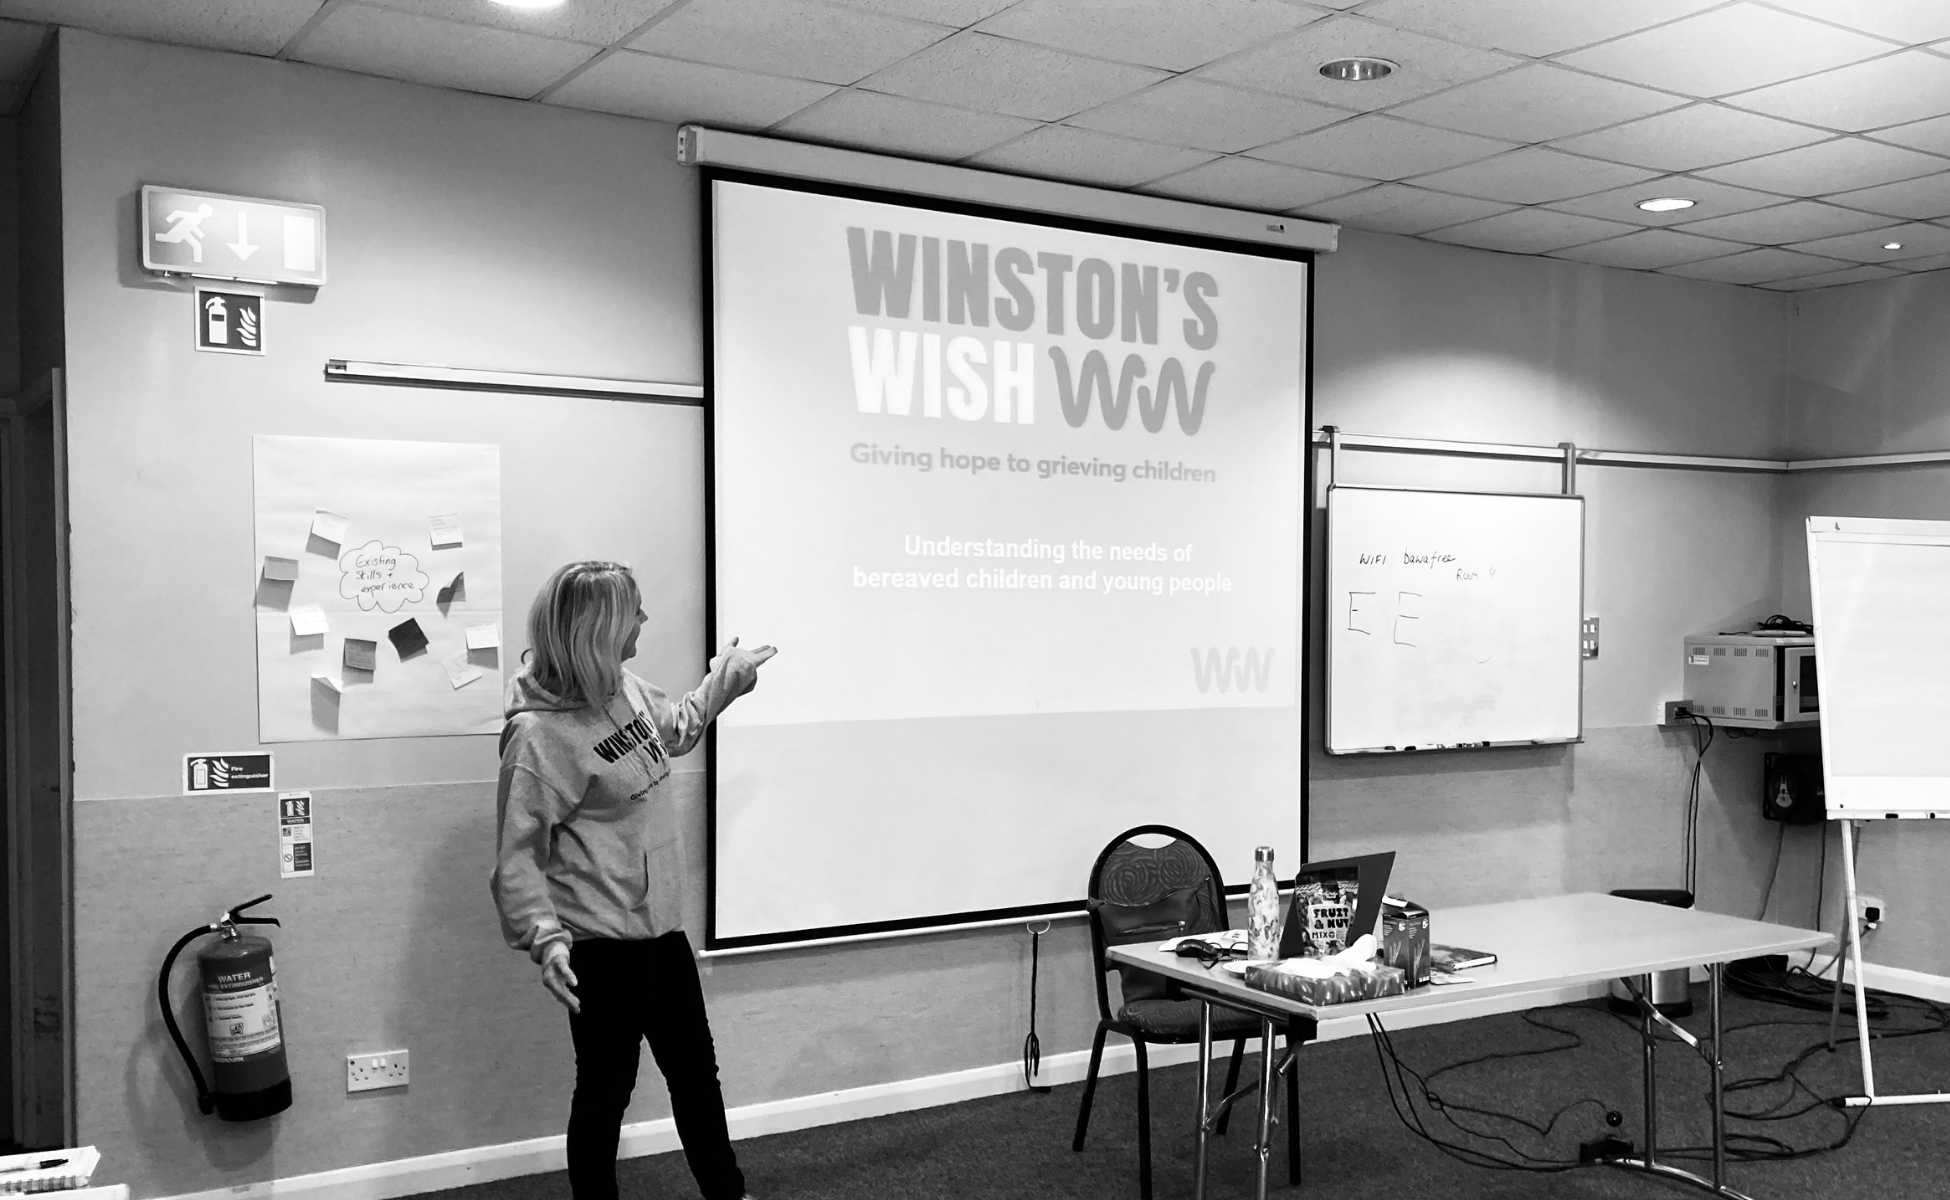 Winston's Wish trainer in front of a projector delivering bespoke bereavement training